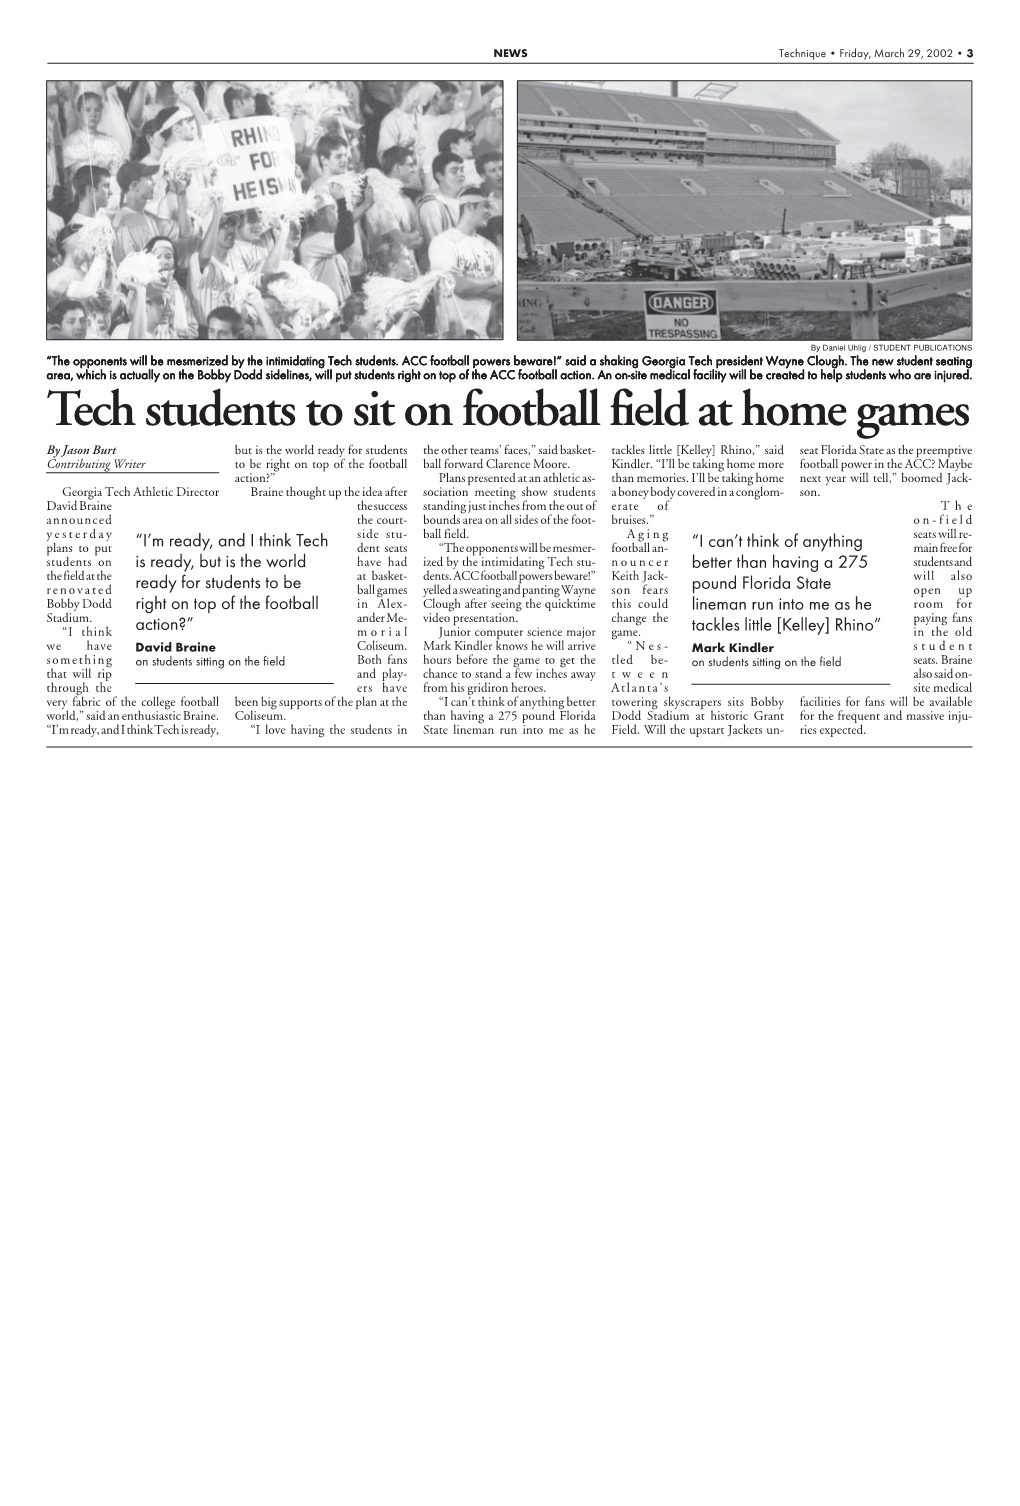 Tech Students to Sit on Football Field at Home Games